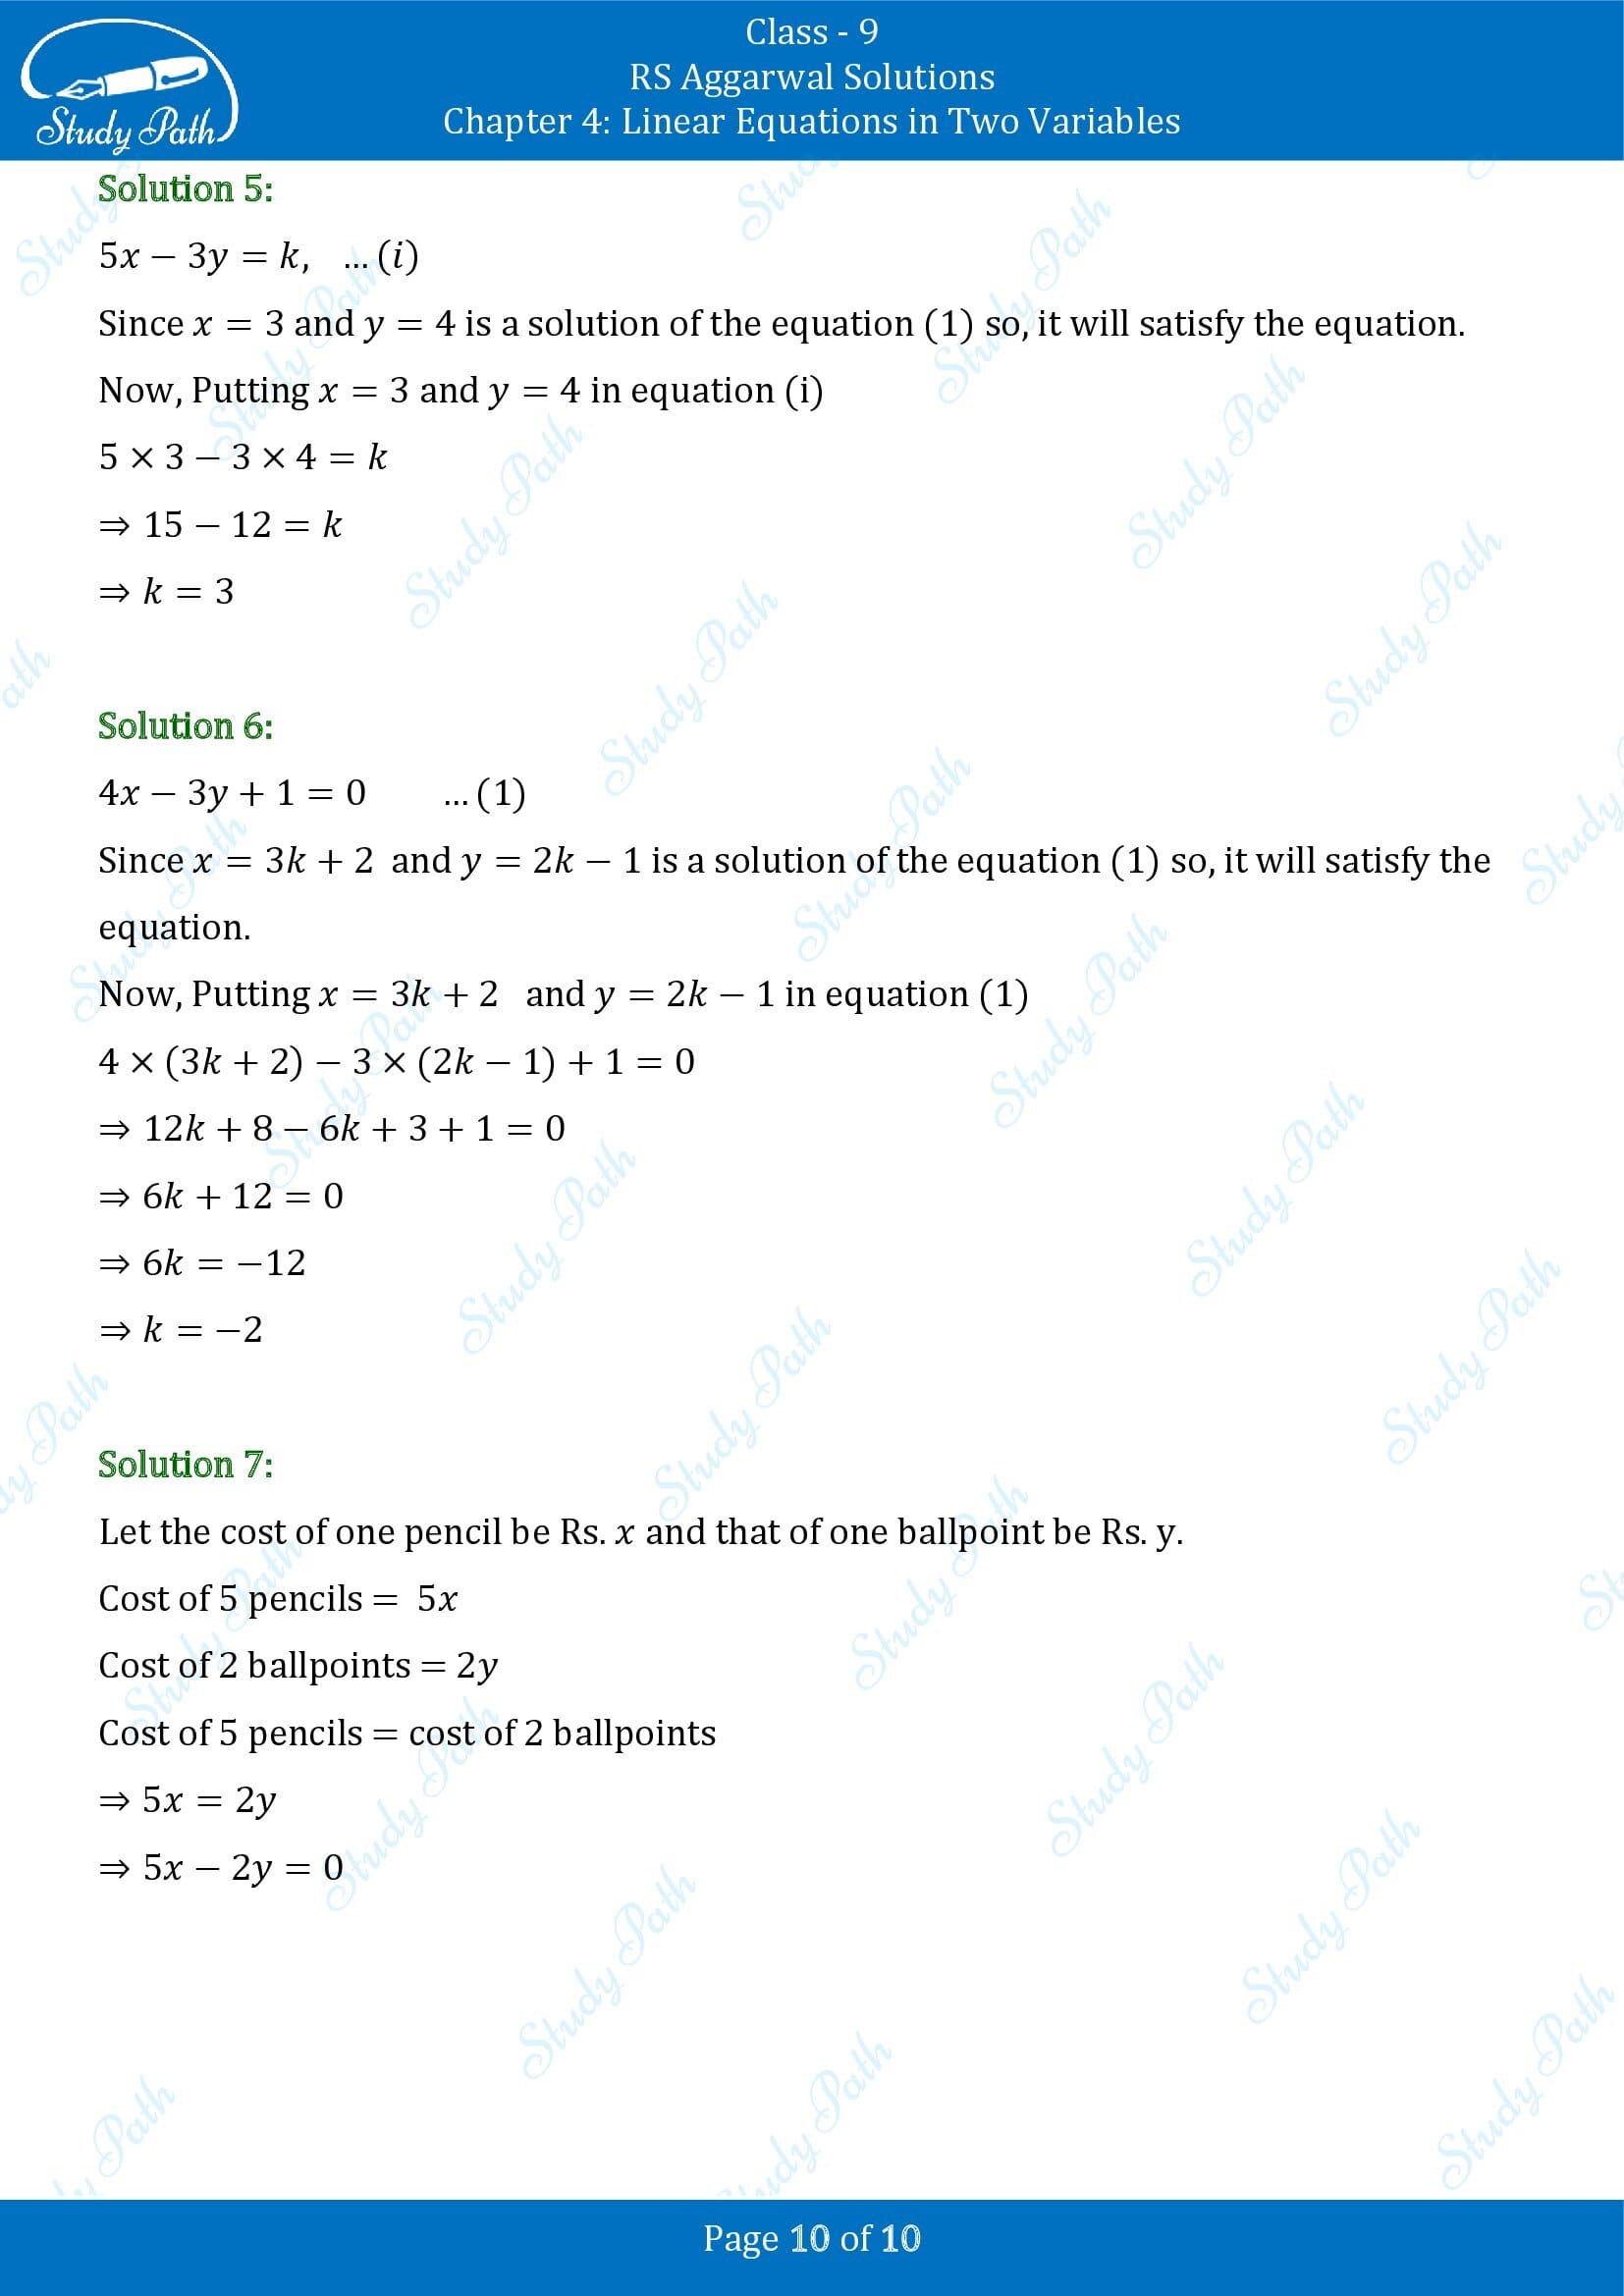 RS Aggarwal Solutions Class 9 Chapter 4 Linear Equations in Two Variables Exercise 4A 0010